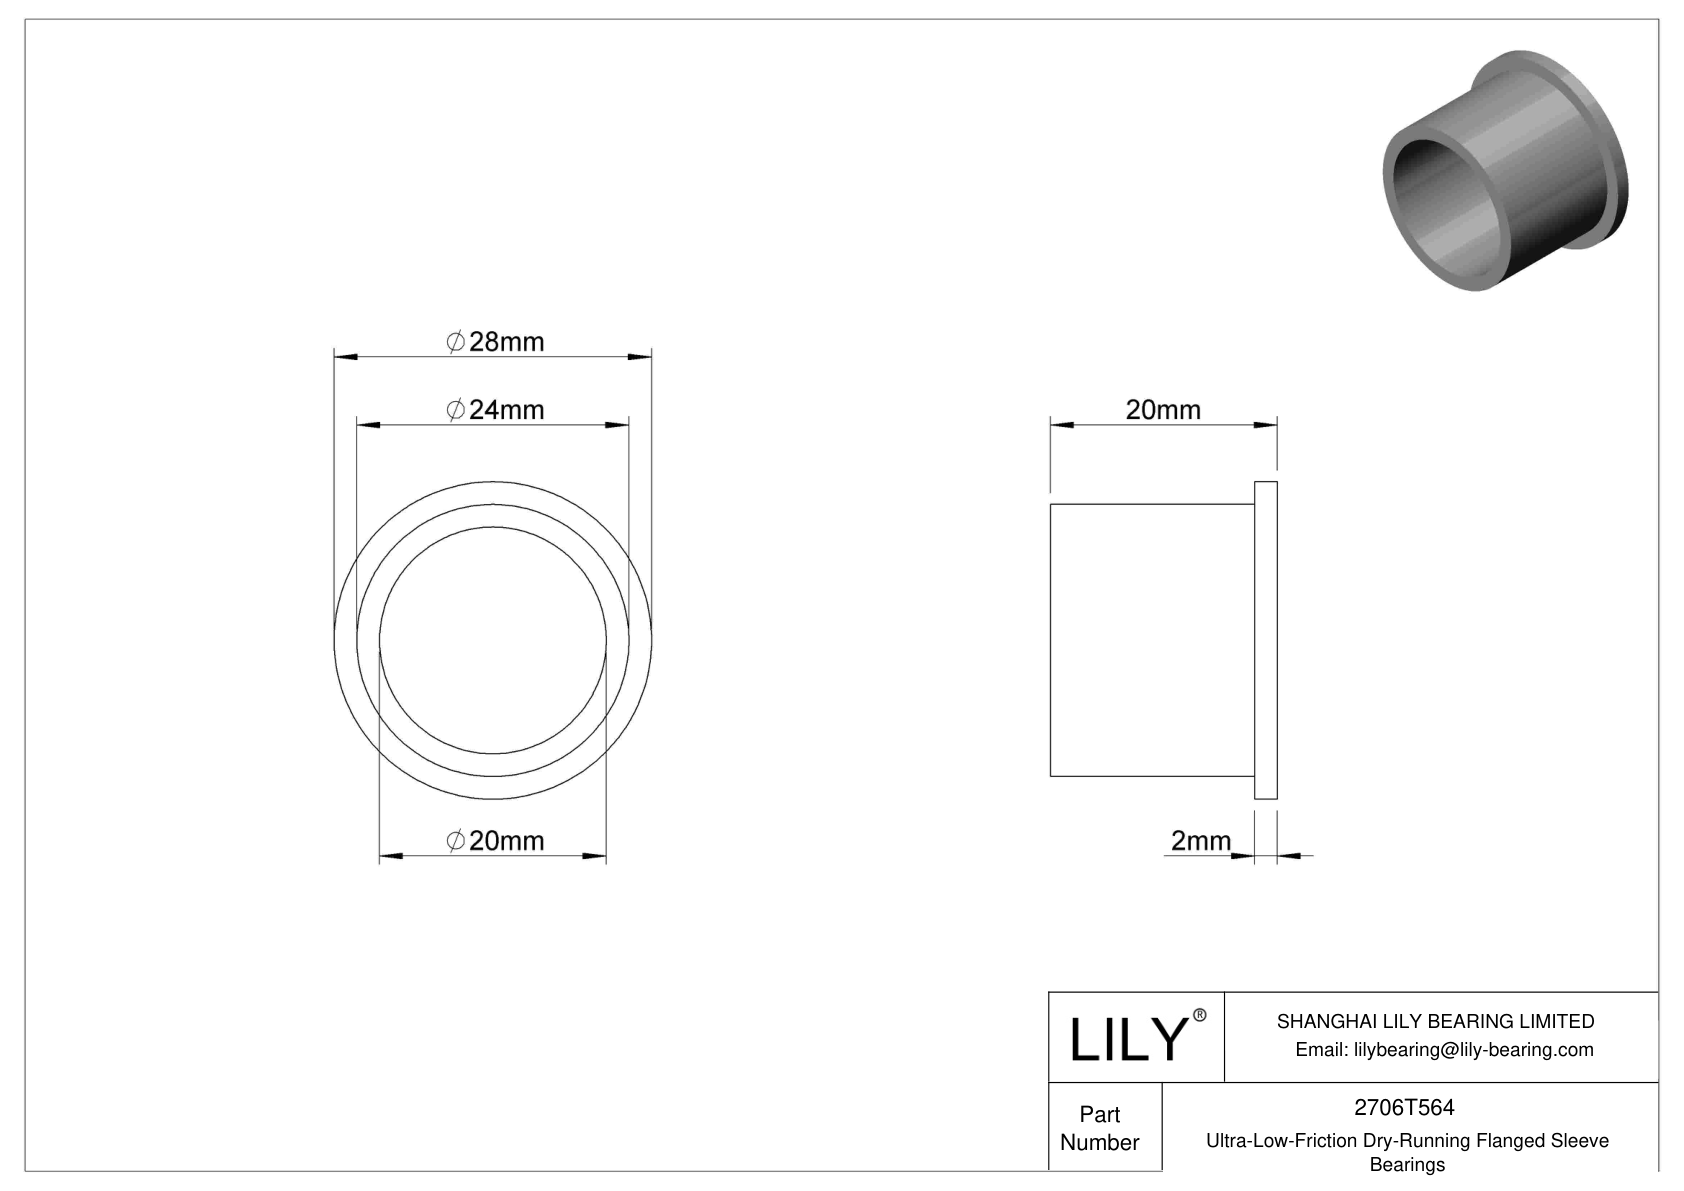 CHAGTFGE Ultra-Low-Friction Dry-Running Flanged Sleeve Bearings cad drawing